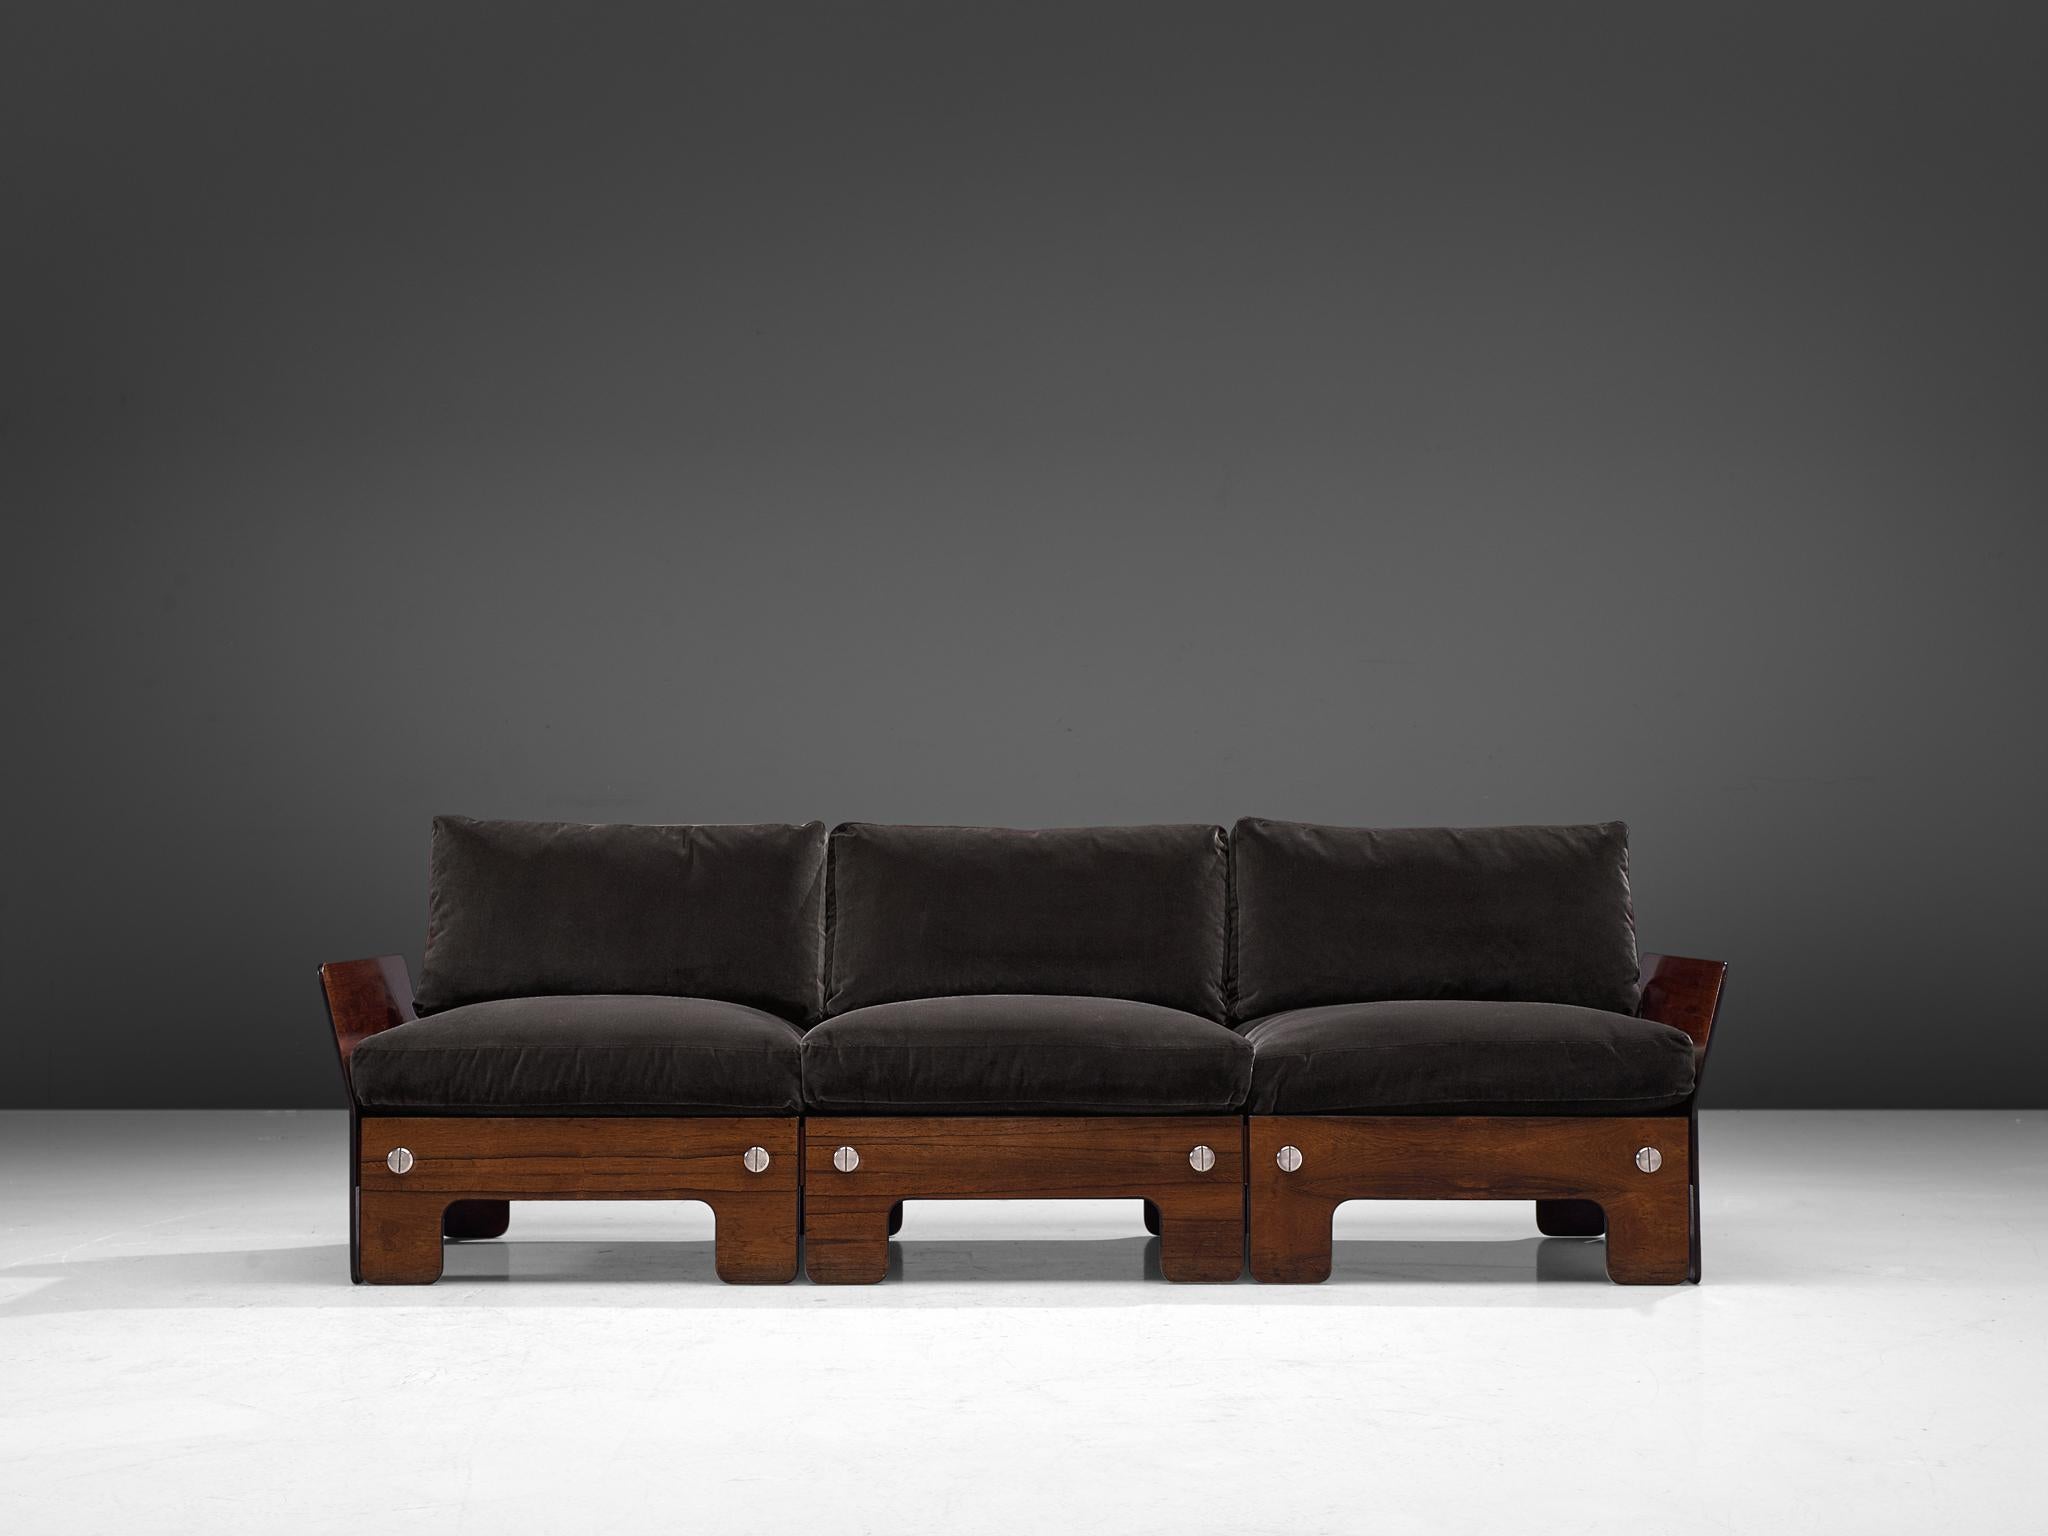 Sofa, rosewood and black leather, Norway, 1960s

This sofa presents very comfortable elements. The boxy look of the sofa is due to its square and rectangular shape, which creates a potent look. The thick cushions are held together with press